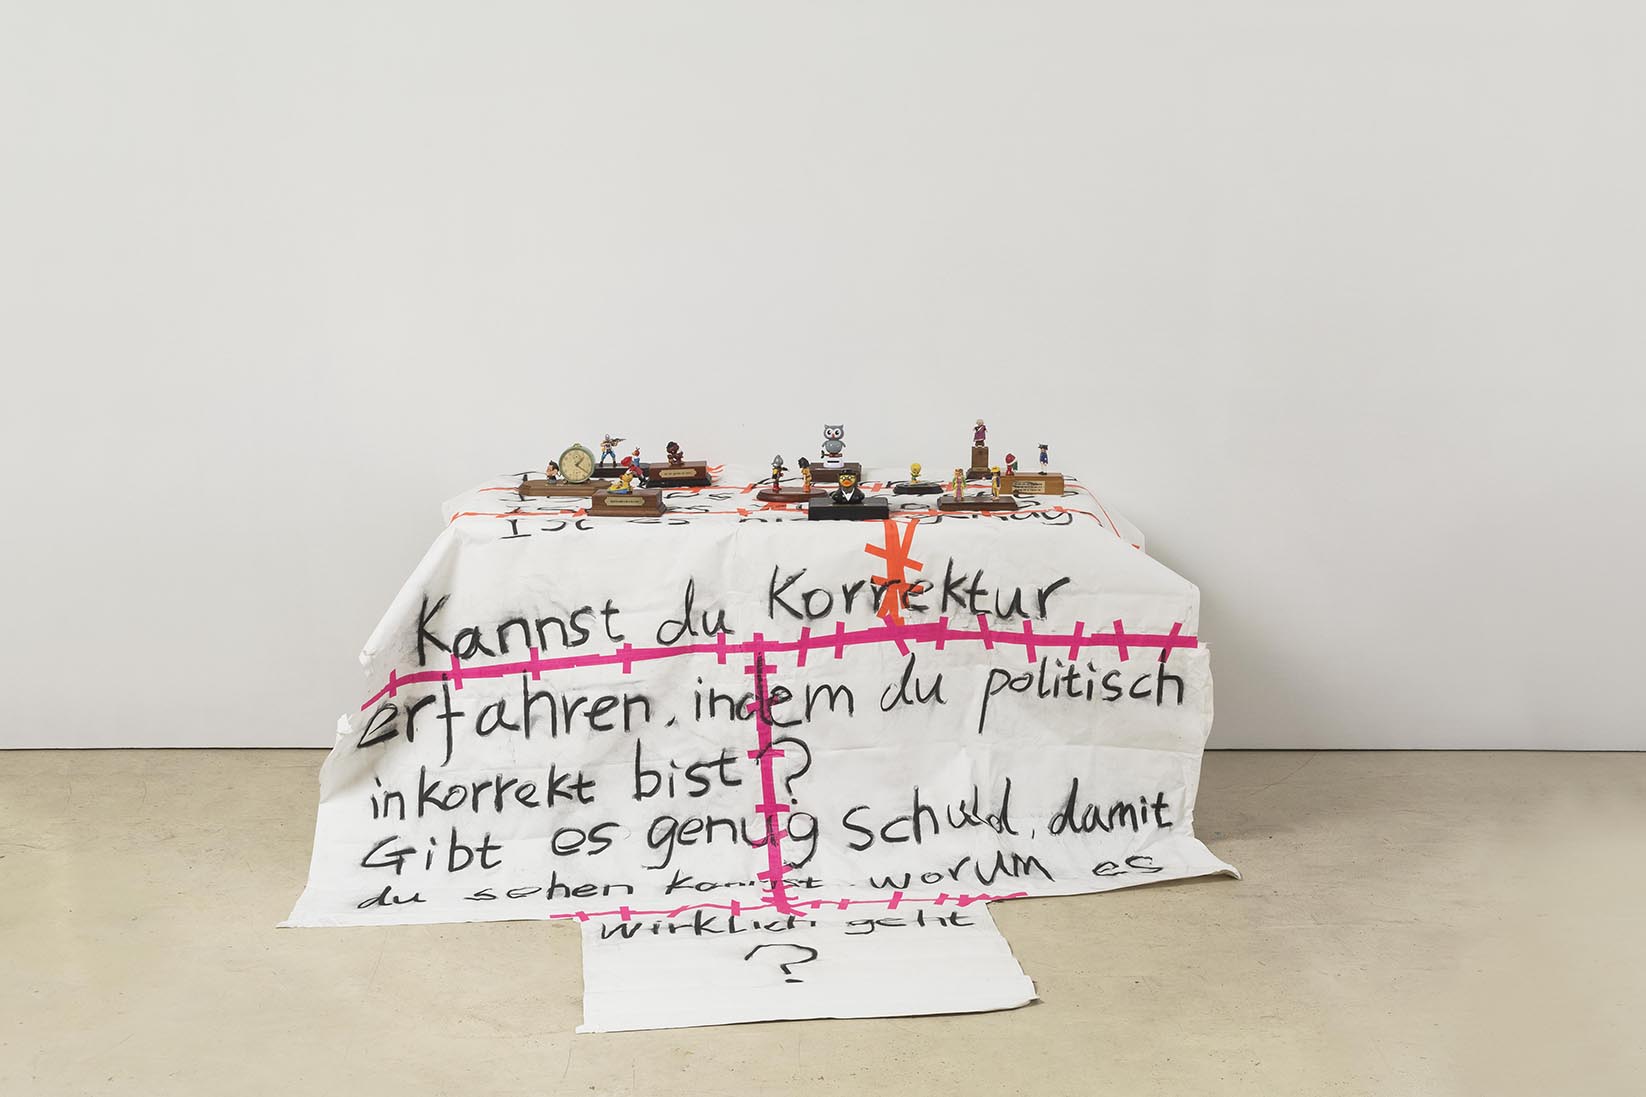 Berlin leftovers-politically Incorrect Sculptures